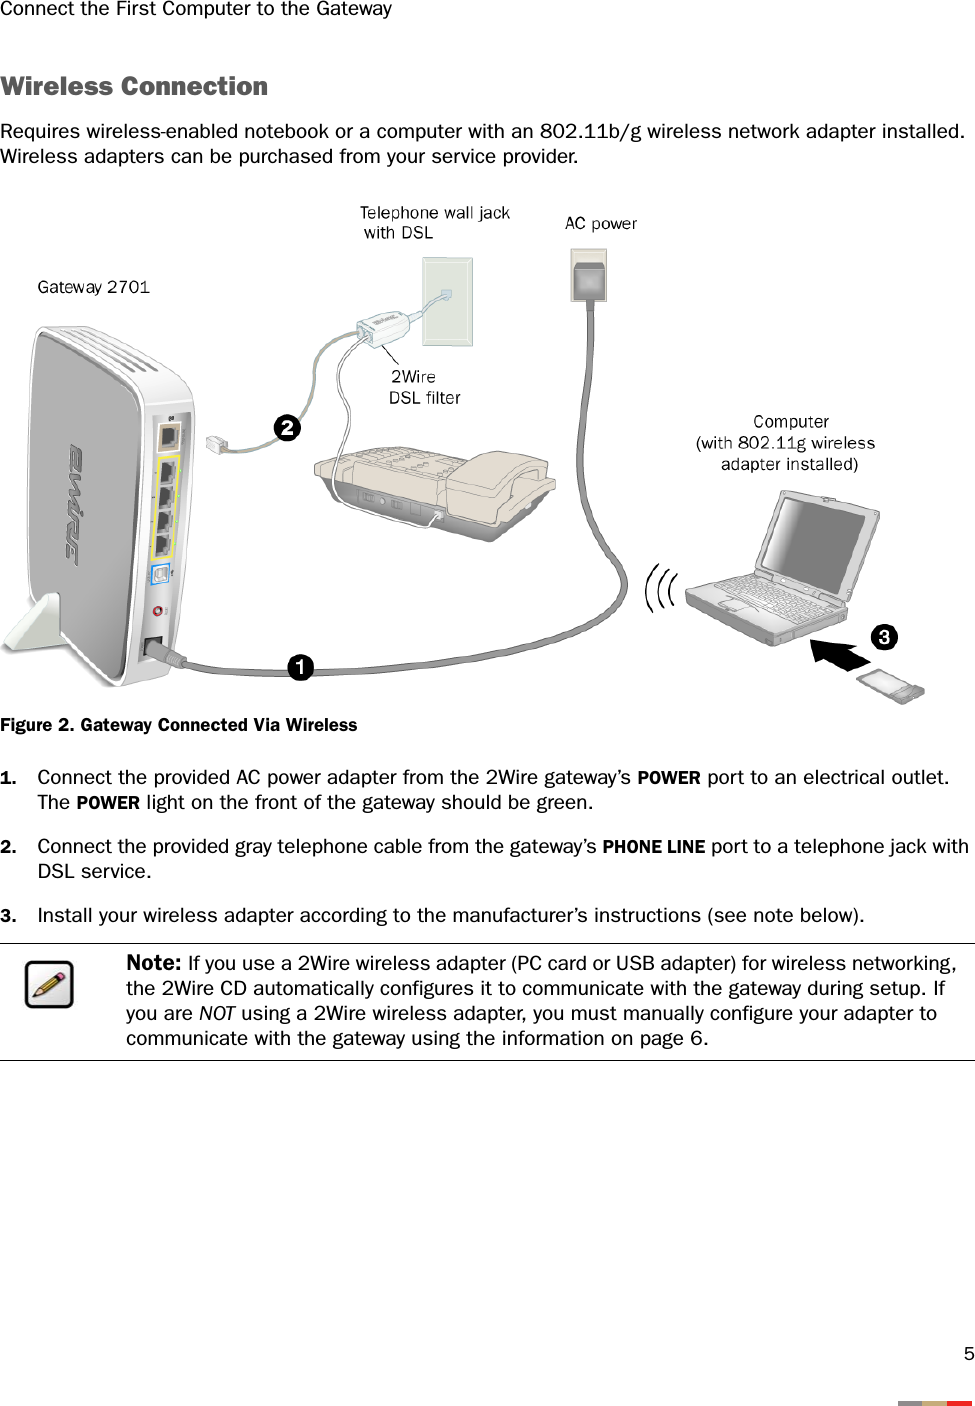 Connect the First Computer to the Gateway5Wireless ConnectionRequires wireless-enabled notebook or a computer with an 802.11b/g wireless network adapter installed. Wireless adapters can be purchased from your service provider.Figure 2. Gateway Connected Via Wireless1. Connect the provided AC power adapter from the 2Wire gateway’s POWER port to an electrical outlet. The POWER light on the front of the gateway should be green.2. Connect the provided gray telephone cable from the gateway’s PHONE LINE port to a telephone jack with DSL service.3. Install your wireless adapter according to the manufacturer’s instructions (see note below).Note: If you use a 2Wire wireless adapter (PC card or USB adapter) for wireless networking, the 2Wire CD automatically configures it to communicate with the gateway during setup. If you are NOT using a 2Wire wireless adapter, you must manually configure your adapter to communicate with the gateway using the information on page 6.